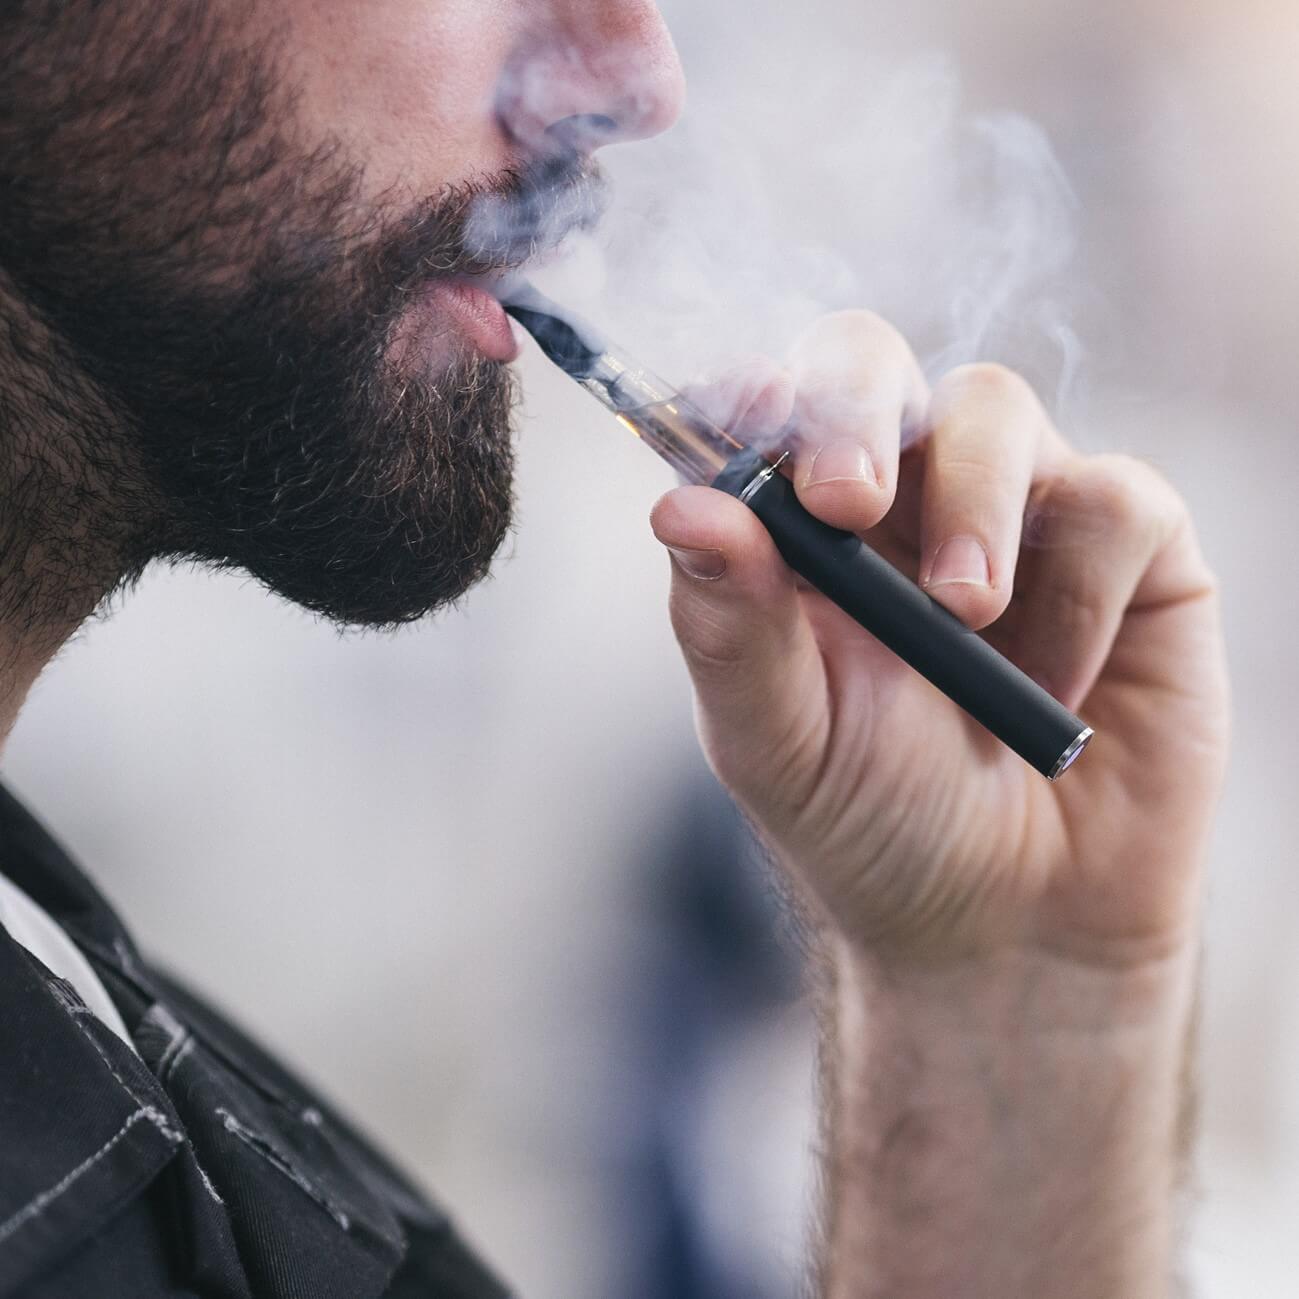 kom videre aborre Borgerskab Are Certain E-Cigs Safer Than Others?